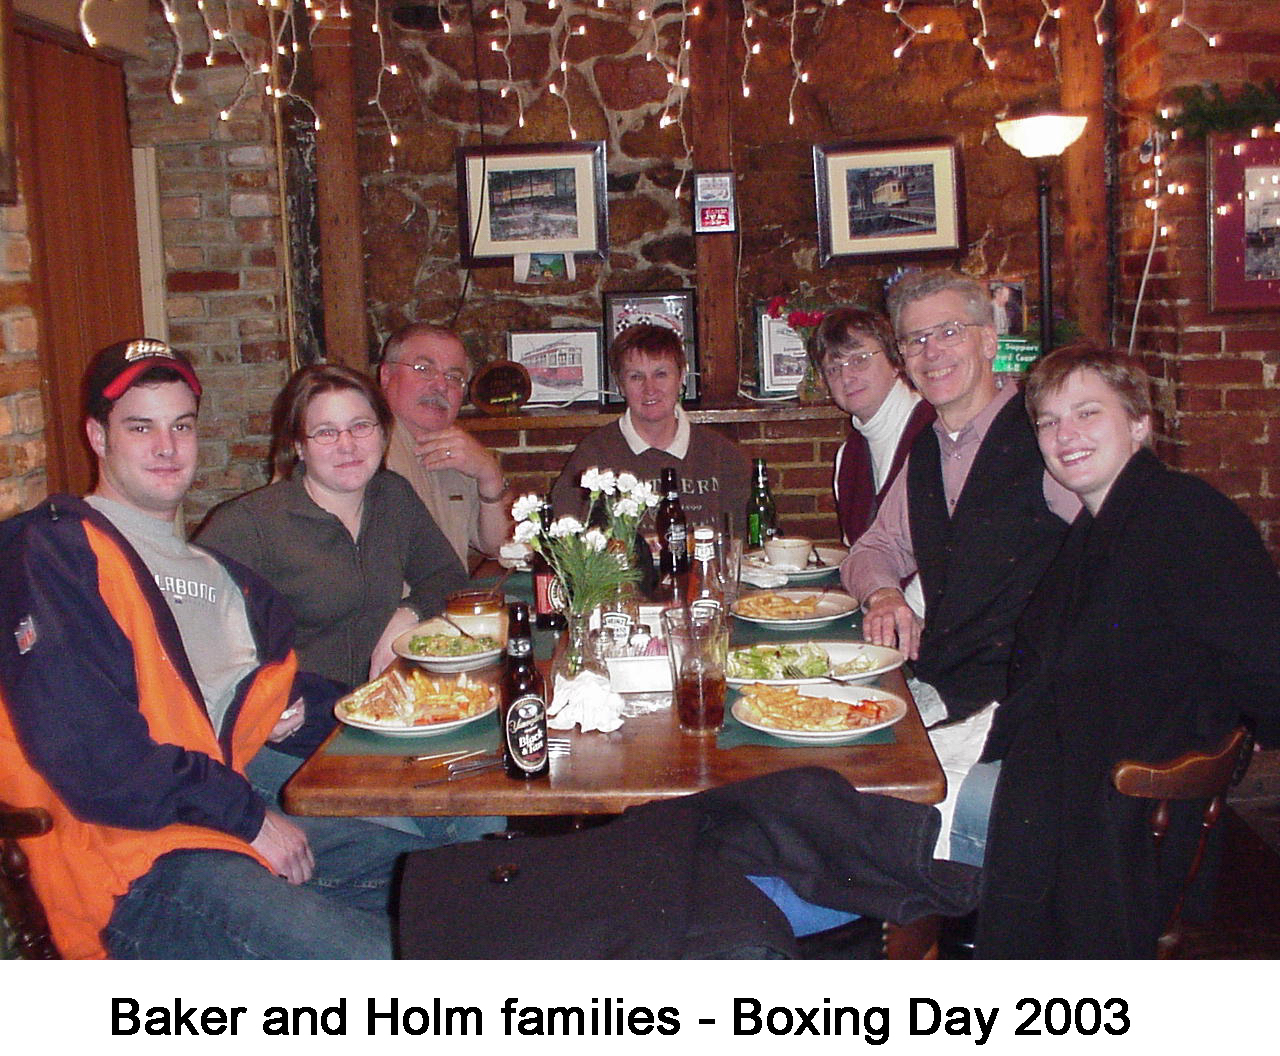 John Baker, Al Holm, and their families at lunch on Boxing Day 2002